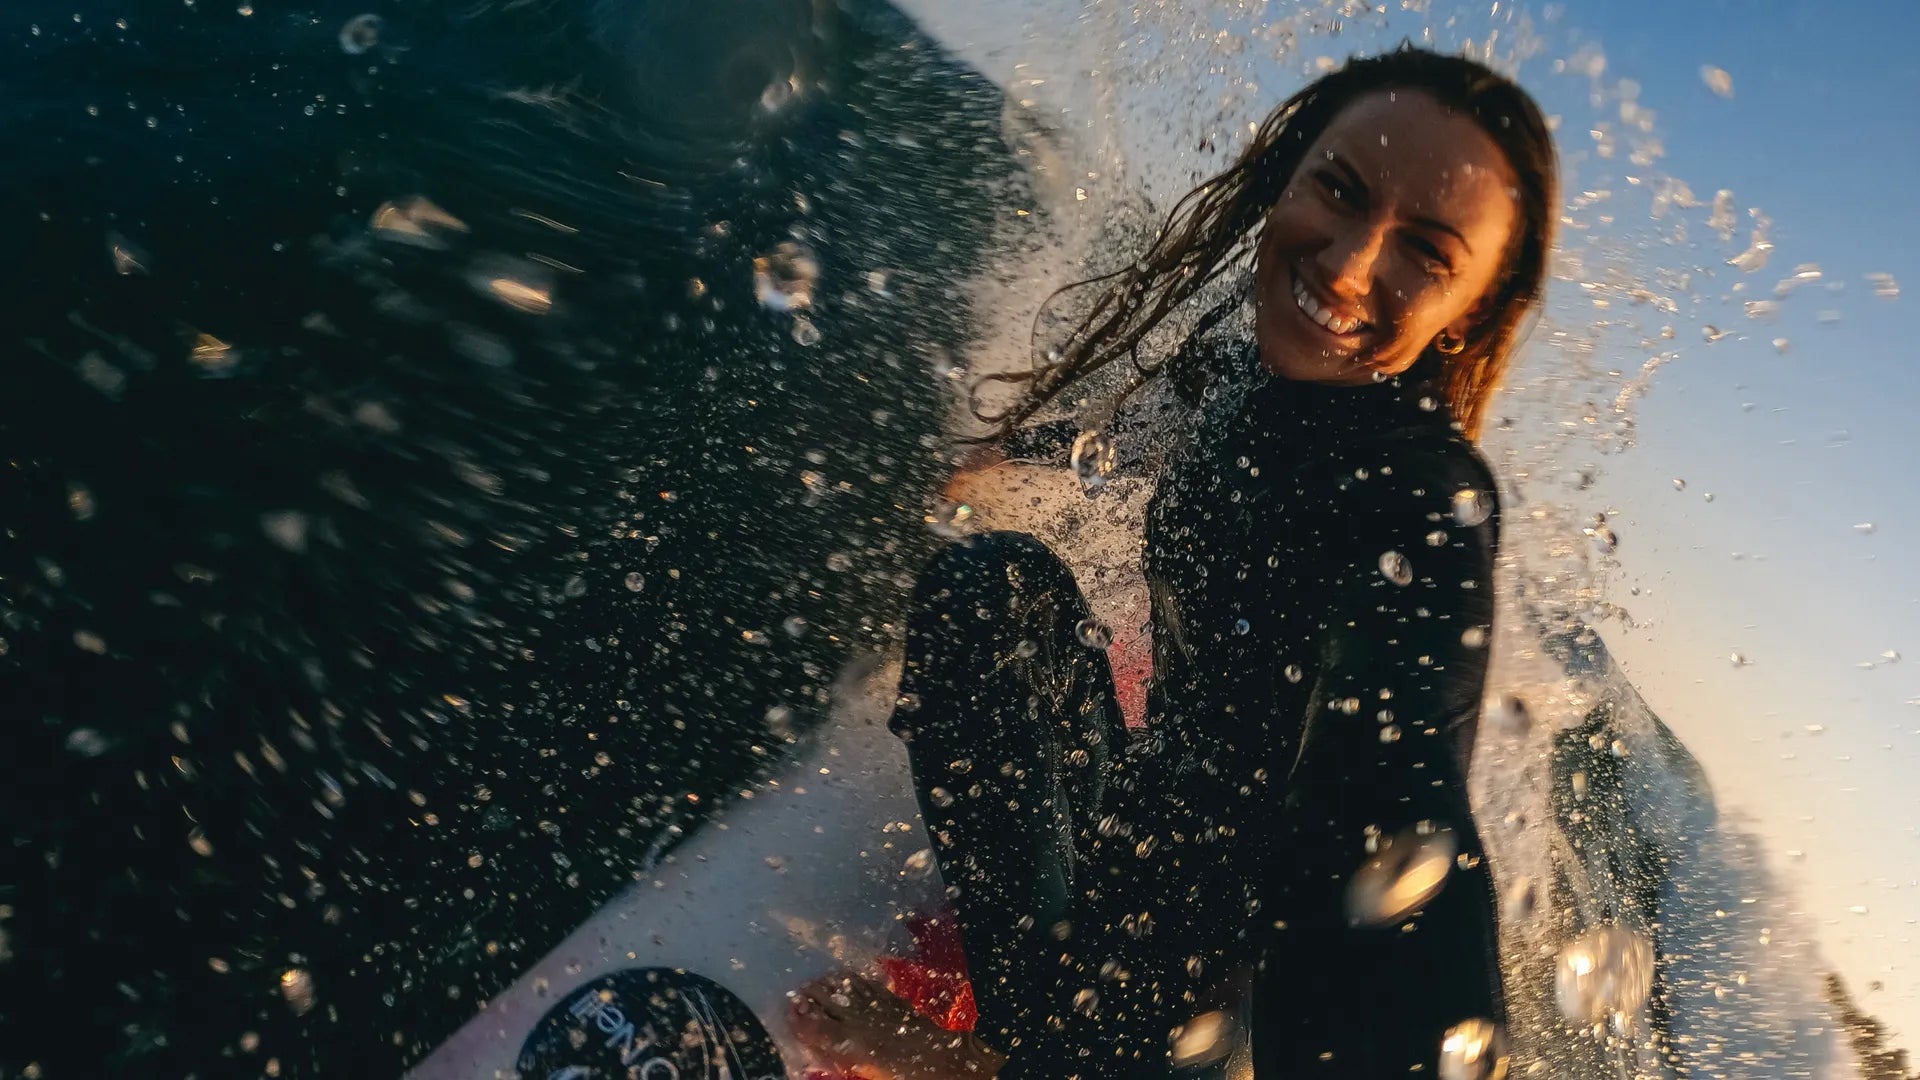 Action shot of the gopro in action in the water with a female surfer smiling whilst the waves splash around her